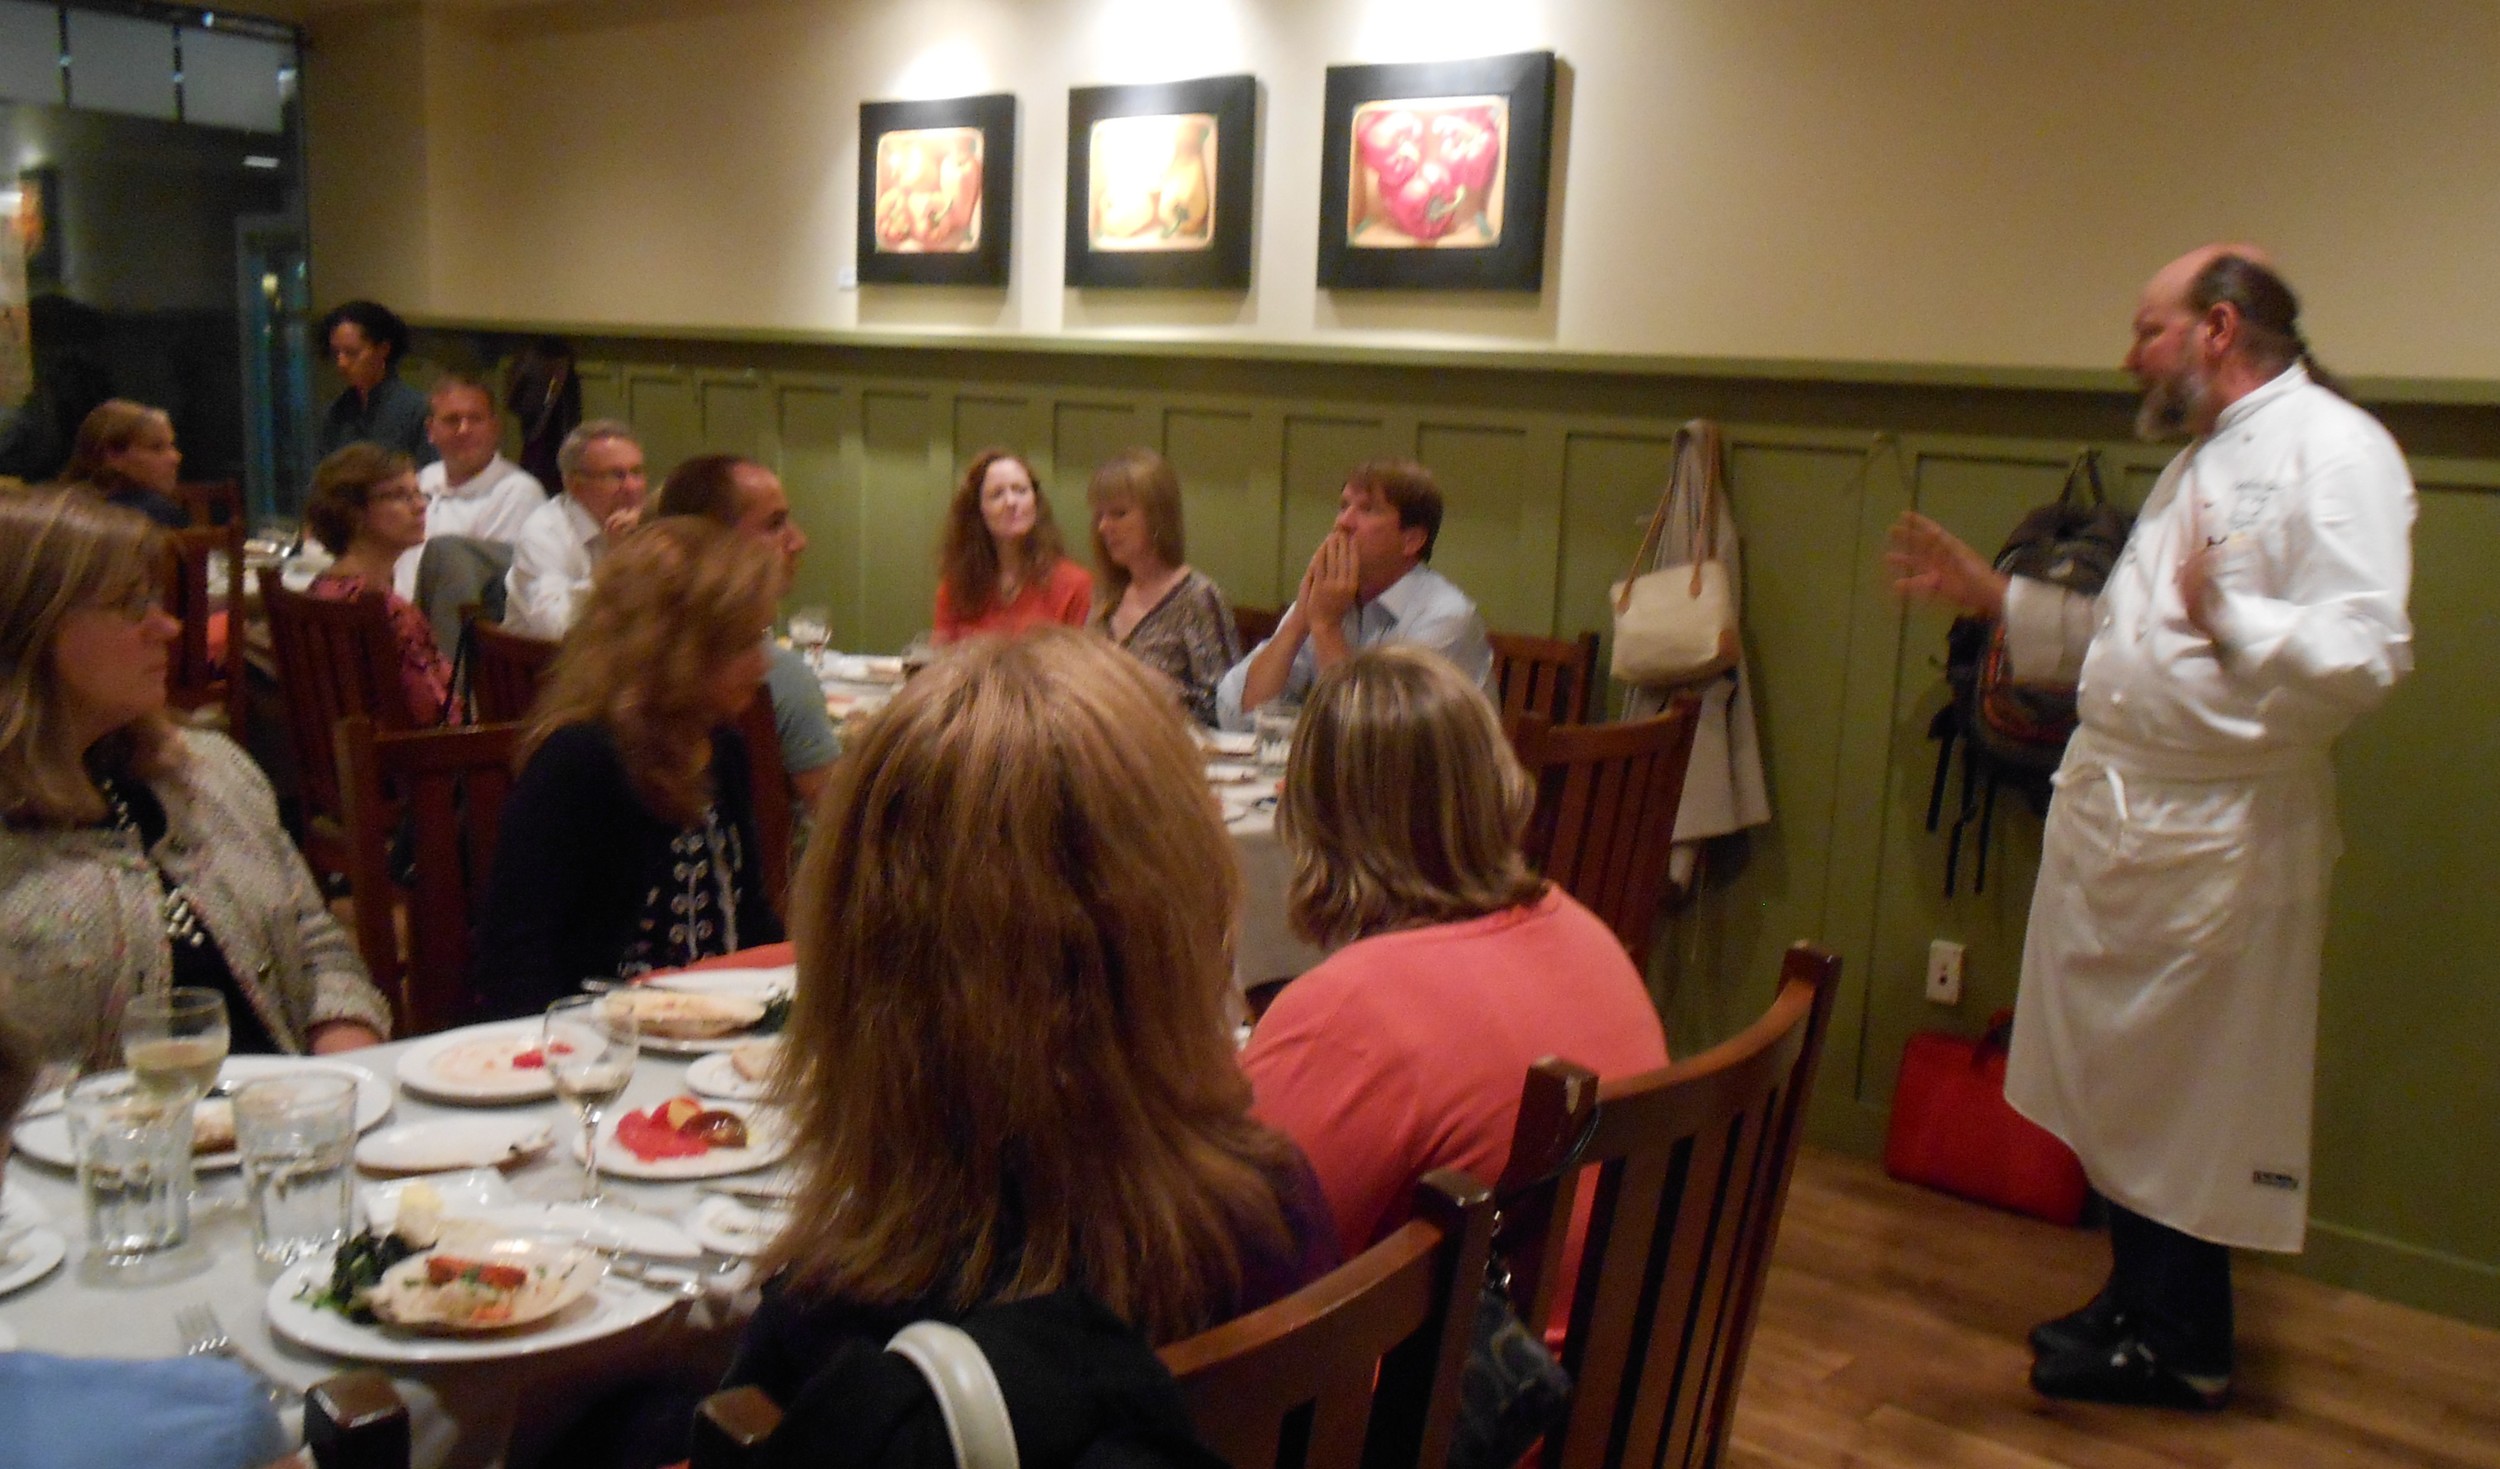 Chef Peter Davis engages in dialogue with the guests about the importance of knowing where your food comes from.